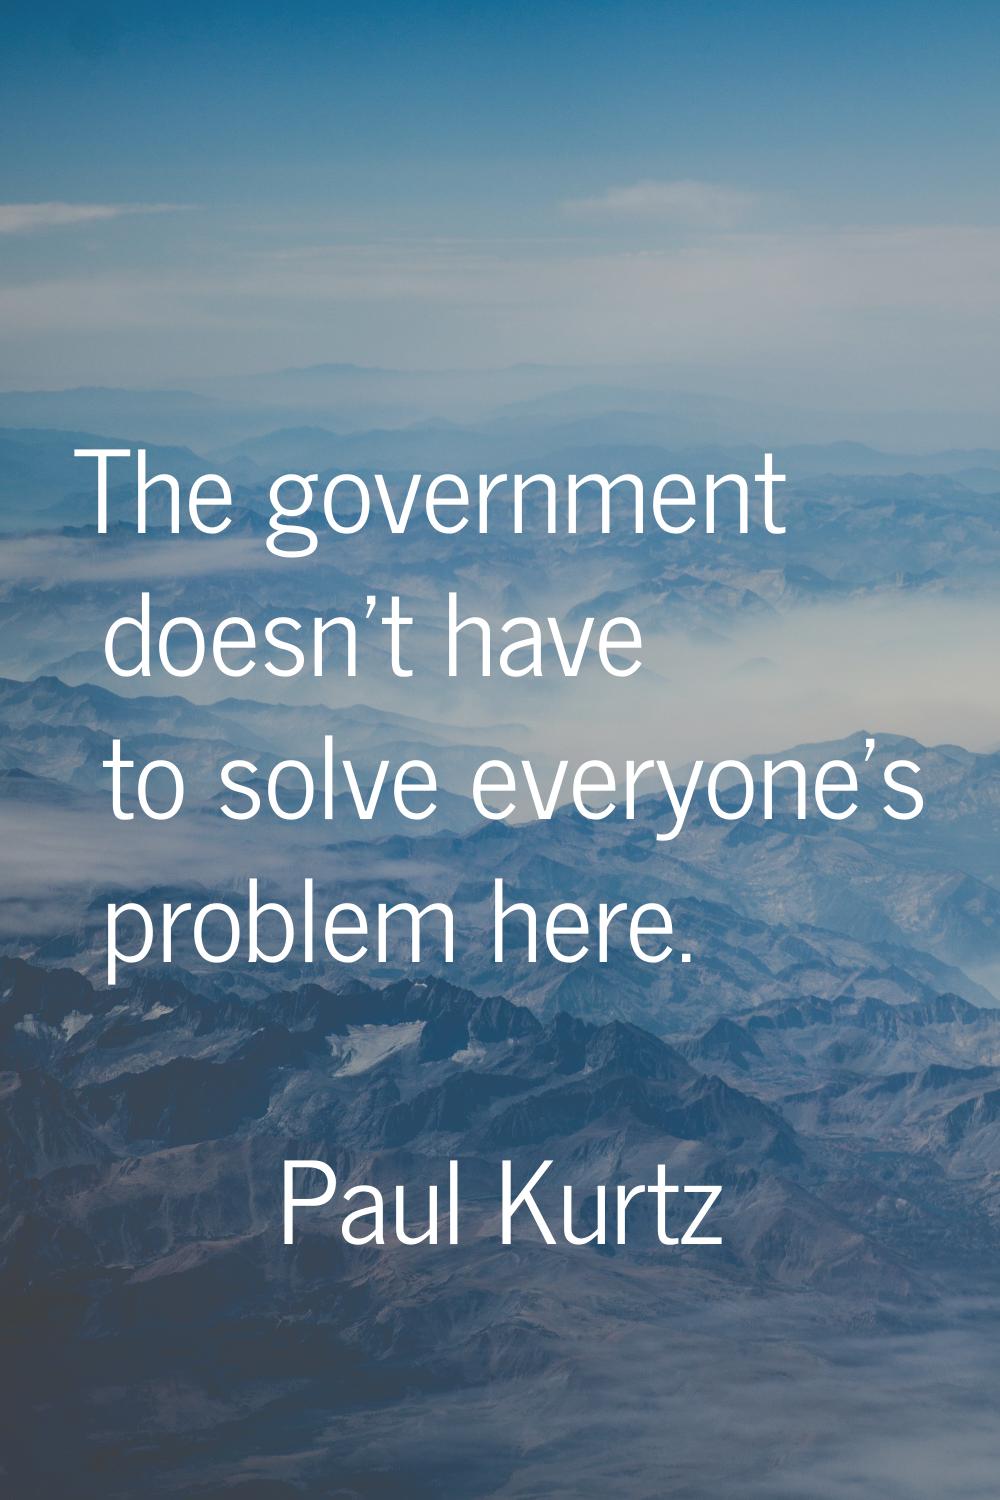 The government doesn't have to solve everyone's problem here.